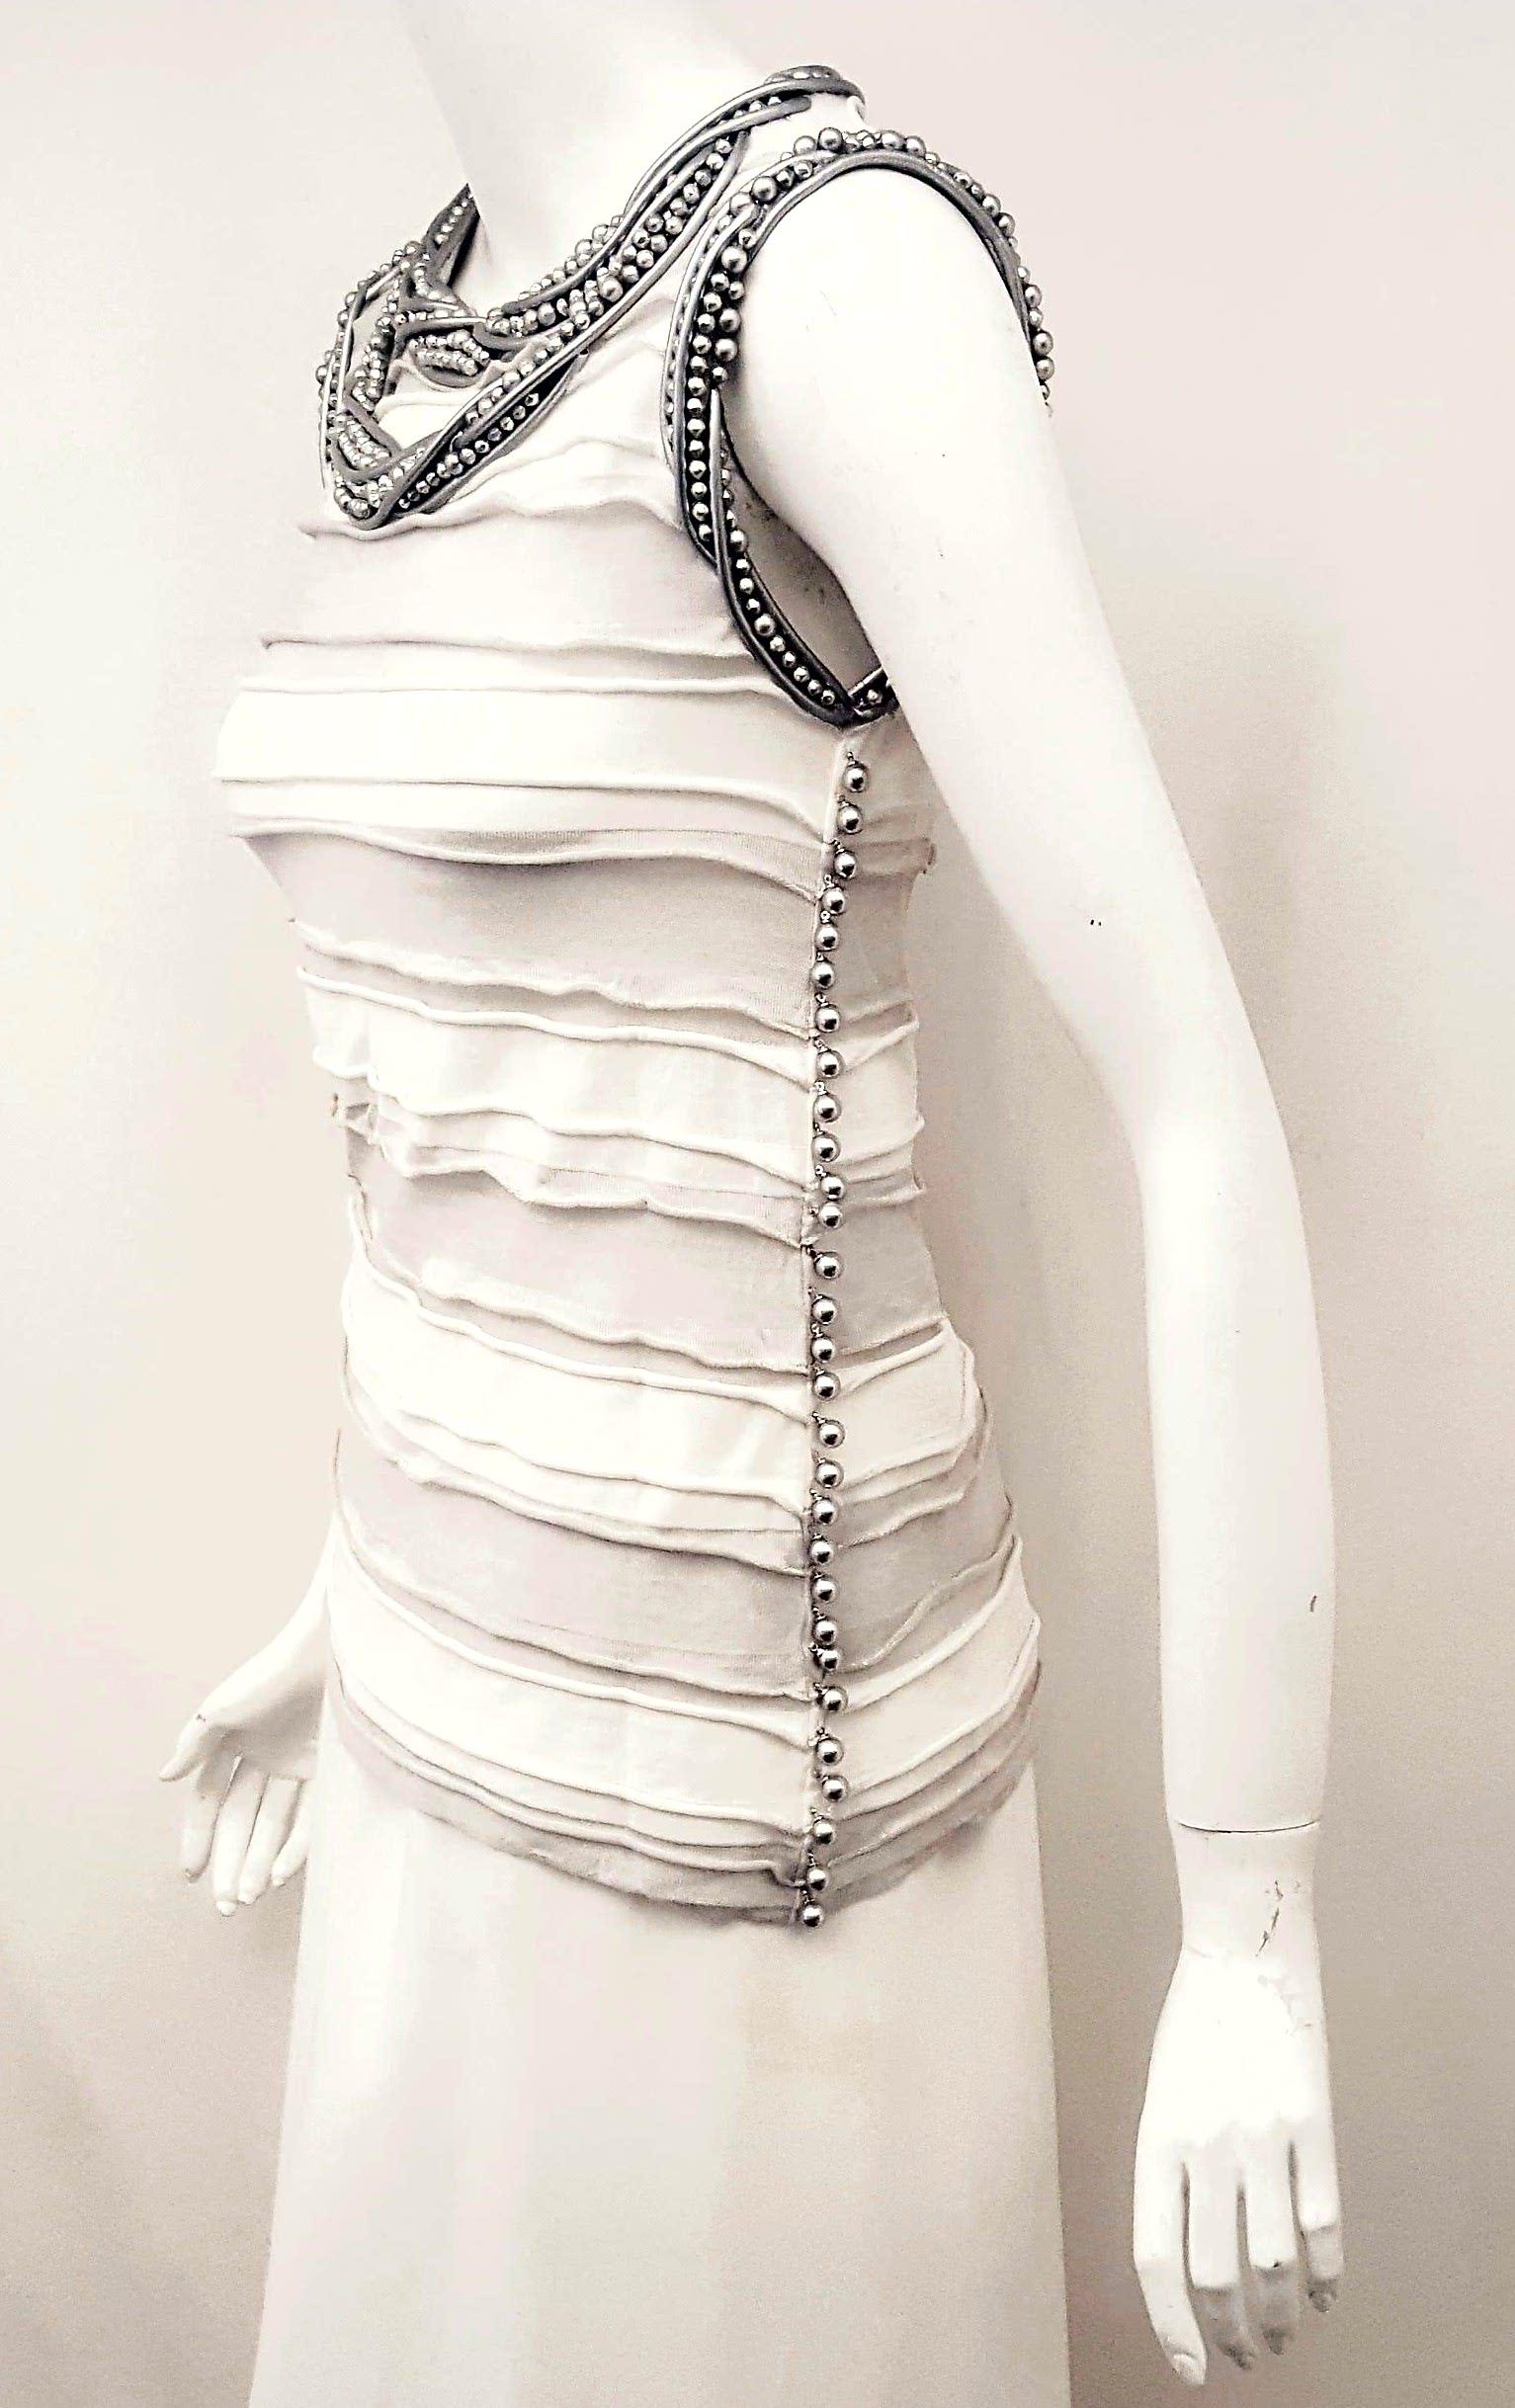 Chanel white and grey knitted ruch top artistically decorated around neckline and arm hole with a double imitation necklace created with silver tone faux pearls and silver leather cords.  The ruching alternating with the grey and white bands forms a